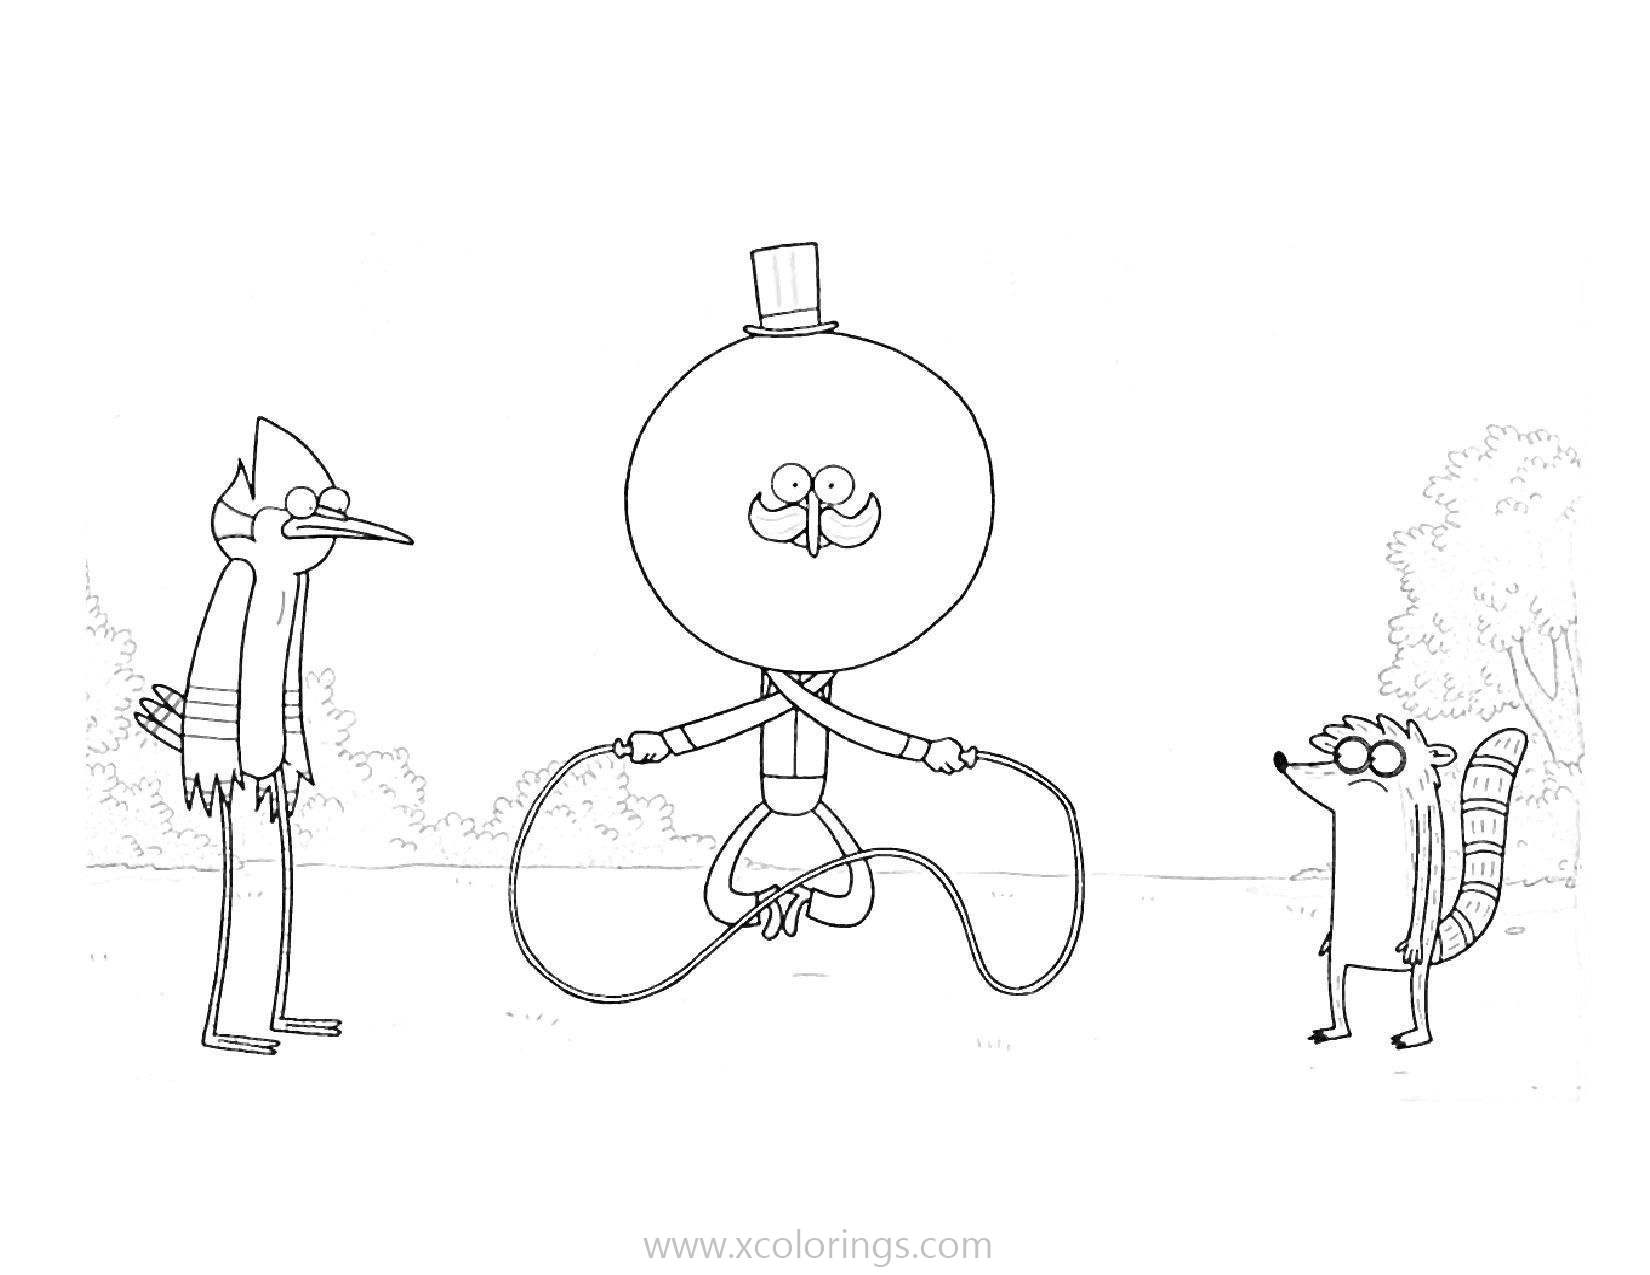 Rigby Regular Show Coloring Page For Kids Free Regula - vrogue.co